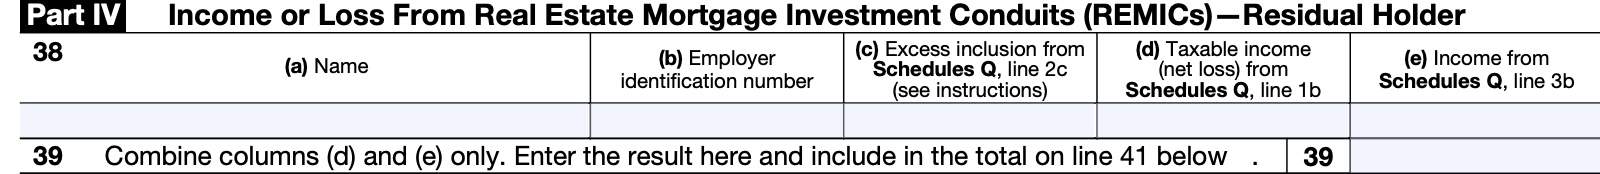 IRS Schedule E, Part III: Income or Loss from Real Estate Mortgage Investment Conduits (REMICs)